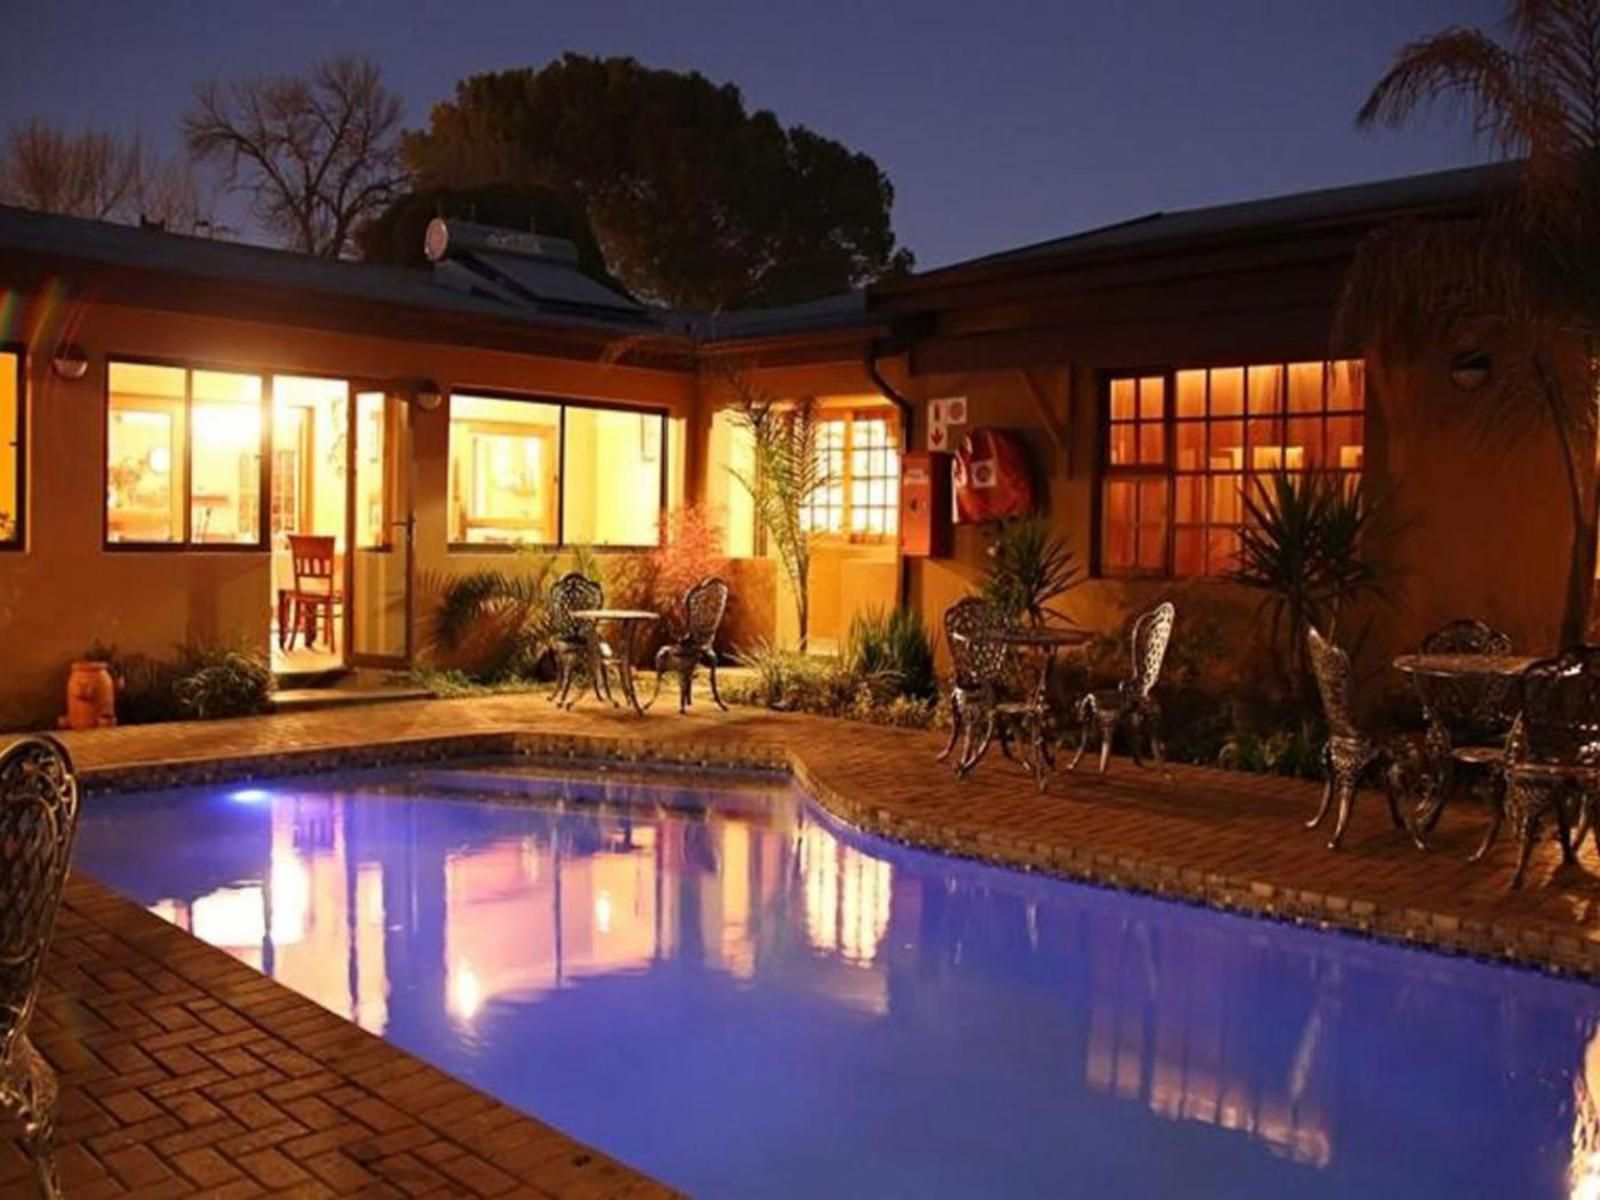 Greenleaf Guest Lodge Universitas Bloemfontein Free State South Africa Complementary Colors, House, Building, Architecture, Swimming Pool